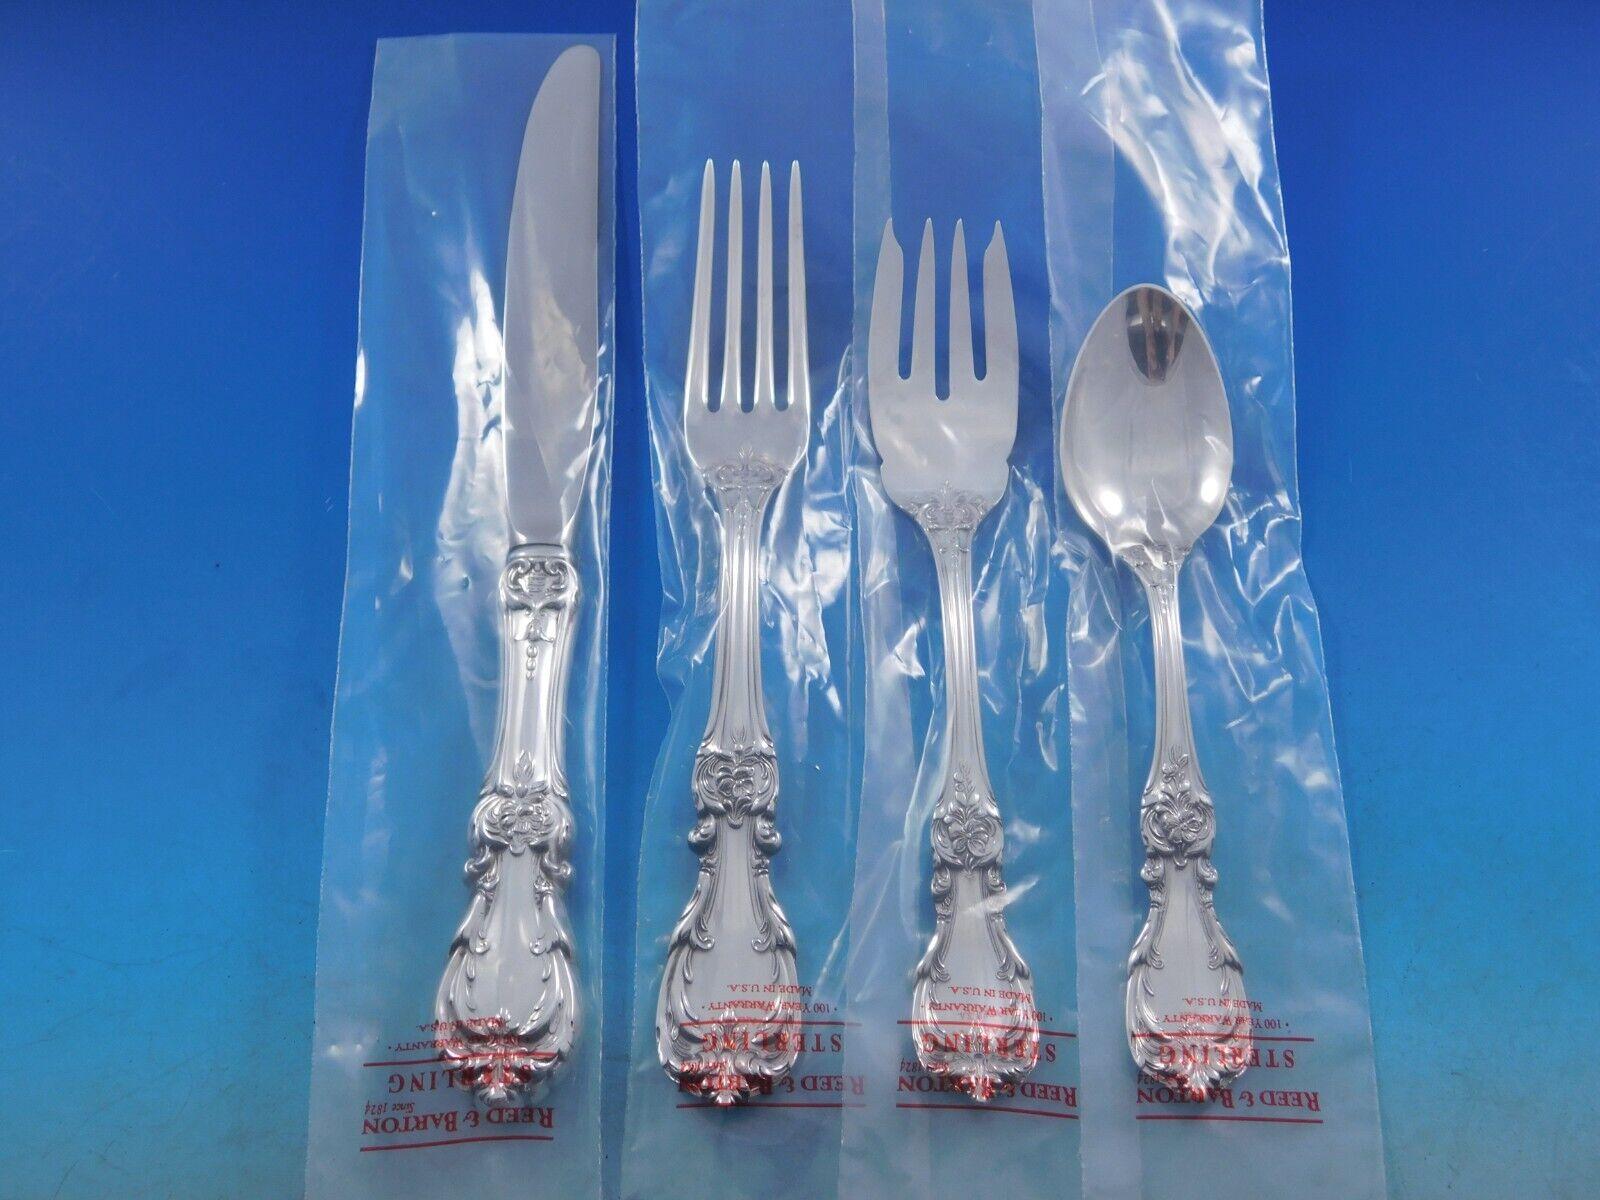 Inspired by the French Renaissance, the Burgundy Sterling Silver Flatware pattern from Reed & Barton is decorated with motifs of scrolls, leaves and flowers which captures old world elegance with up-to-date flourishes.
BURGUNDY BY REED & BARTON